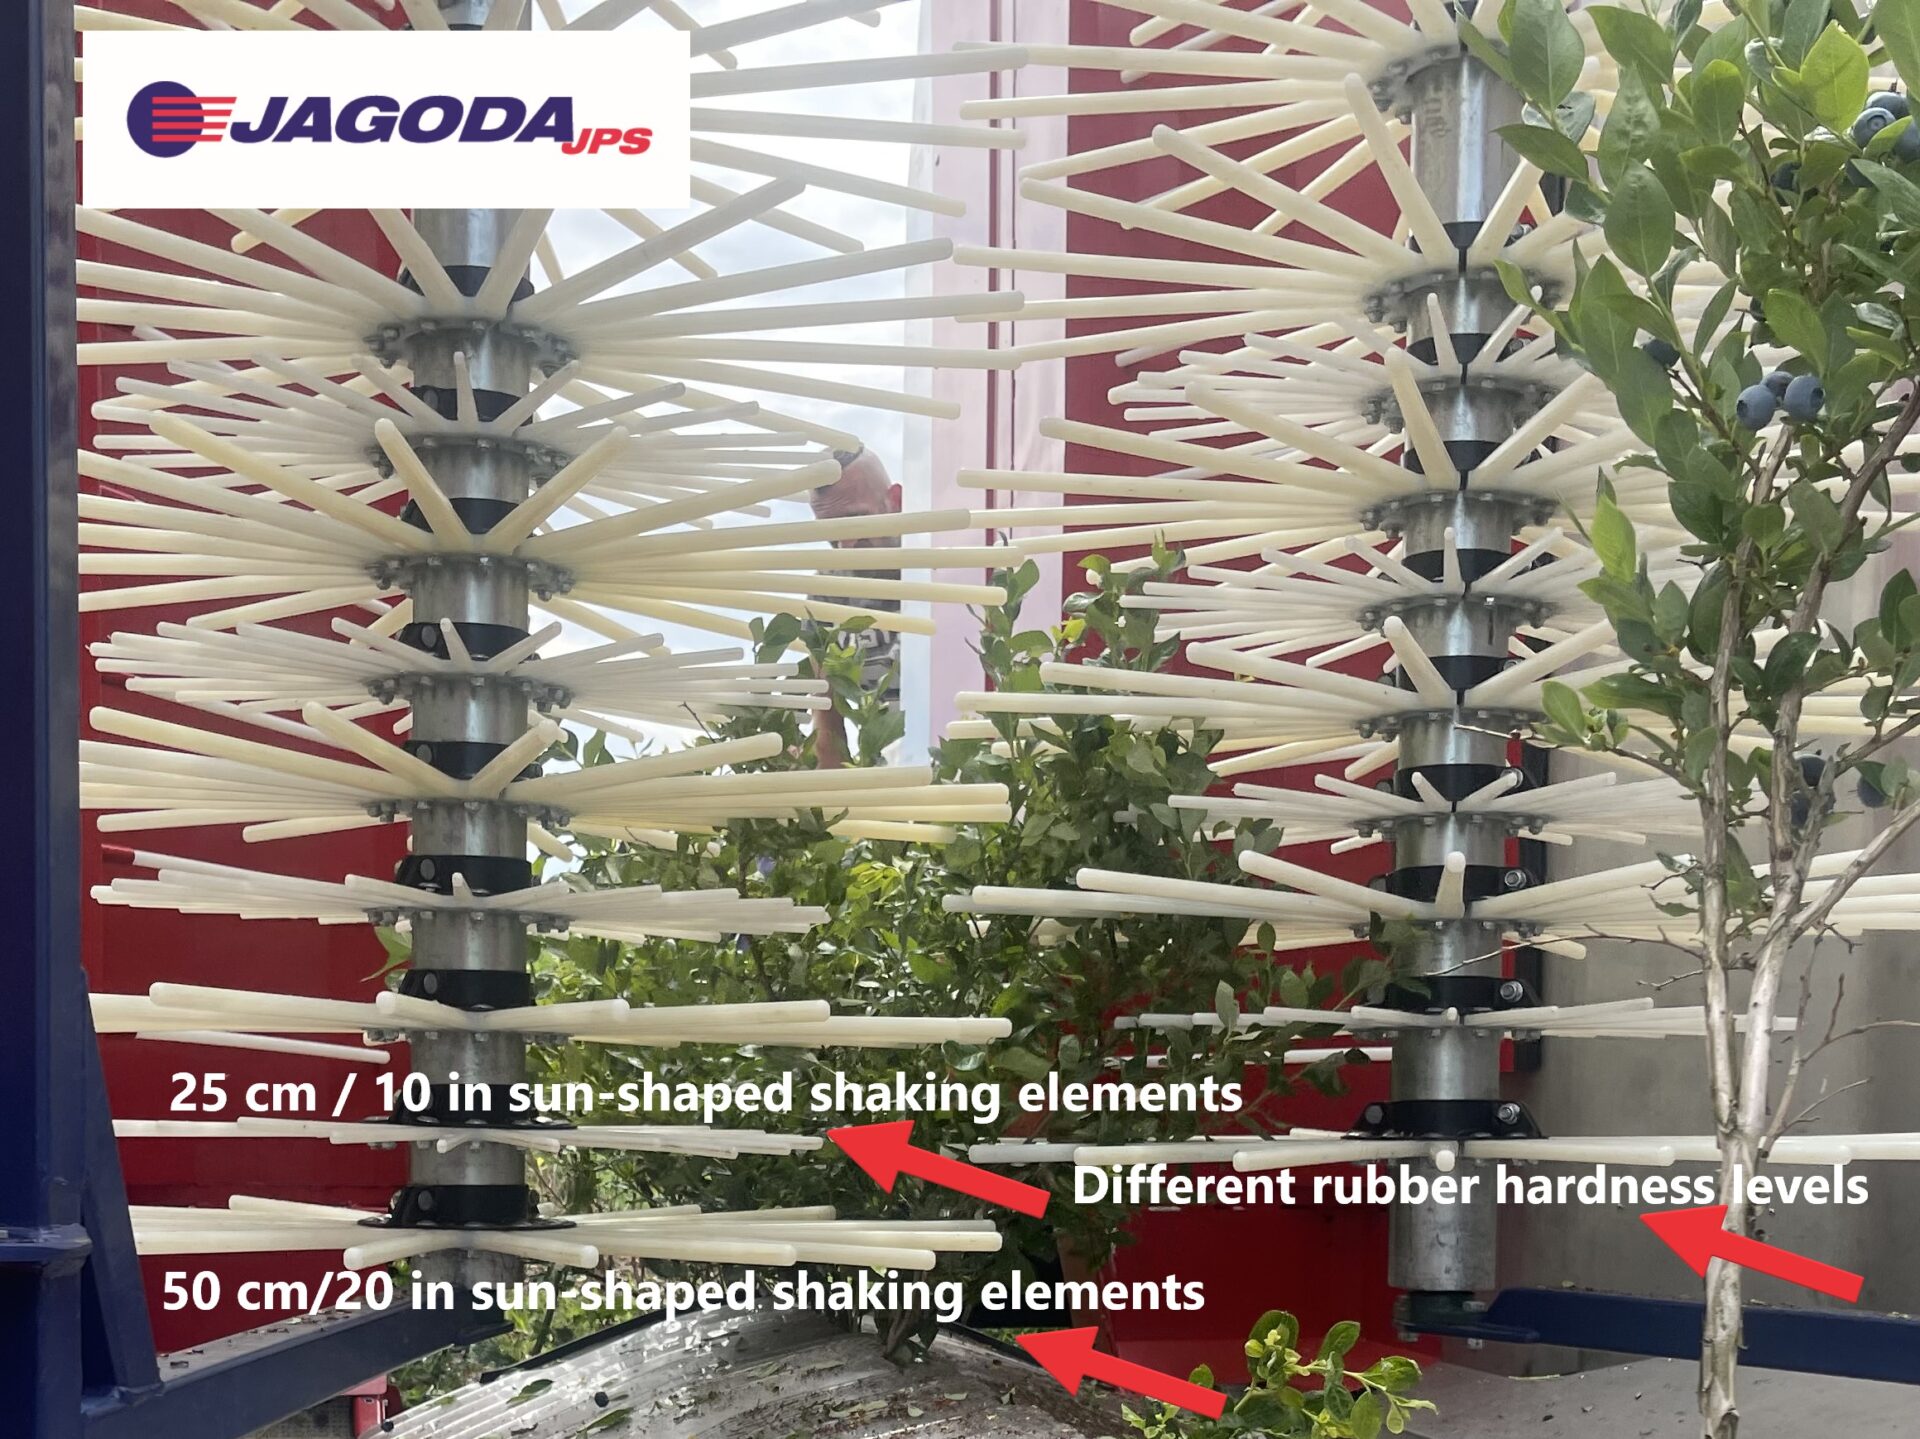 A close-up photo of the sun-shaped shaking elements on the JAGODA 300's shaking column